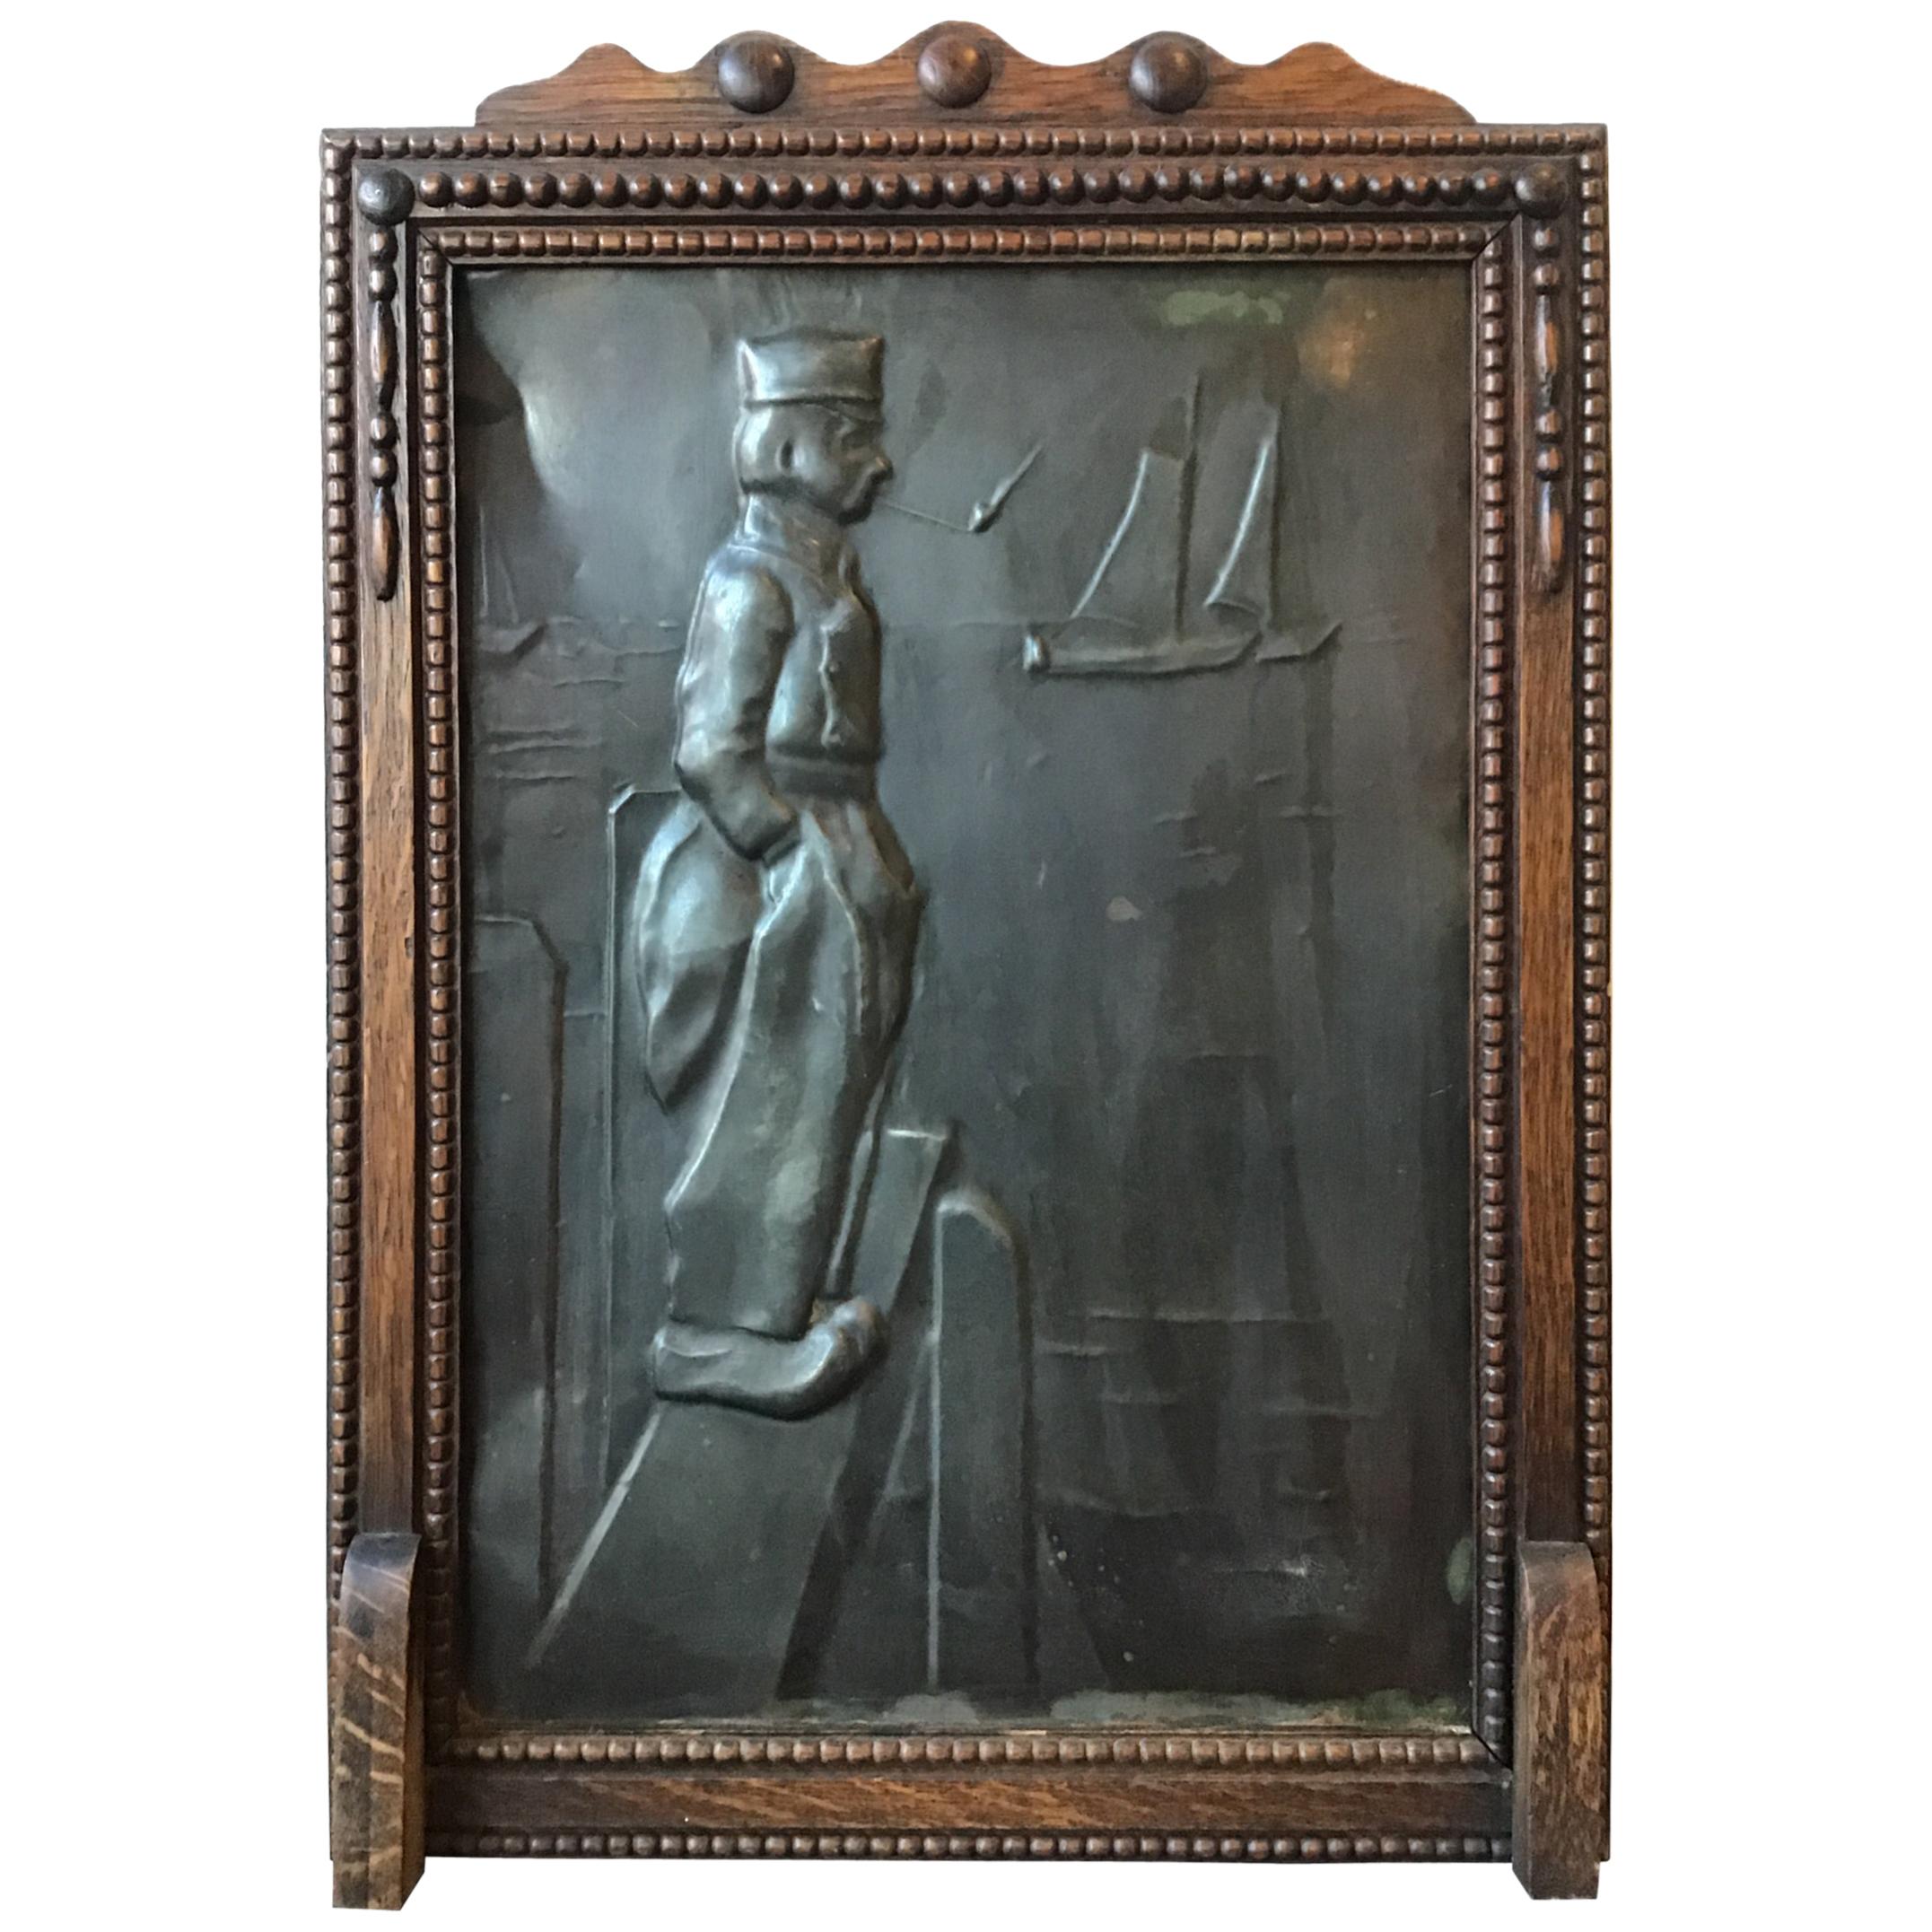 1920s Embossed Tin Plaque of Dutch Sailor in Wood Frame